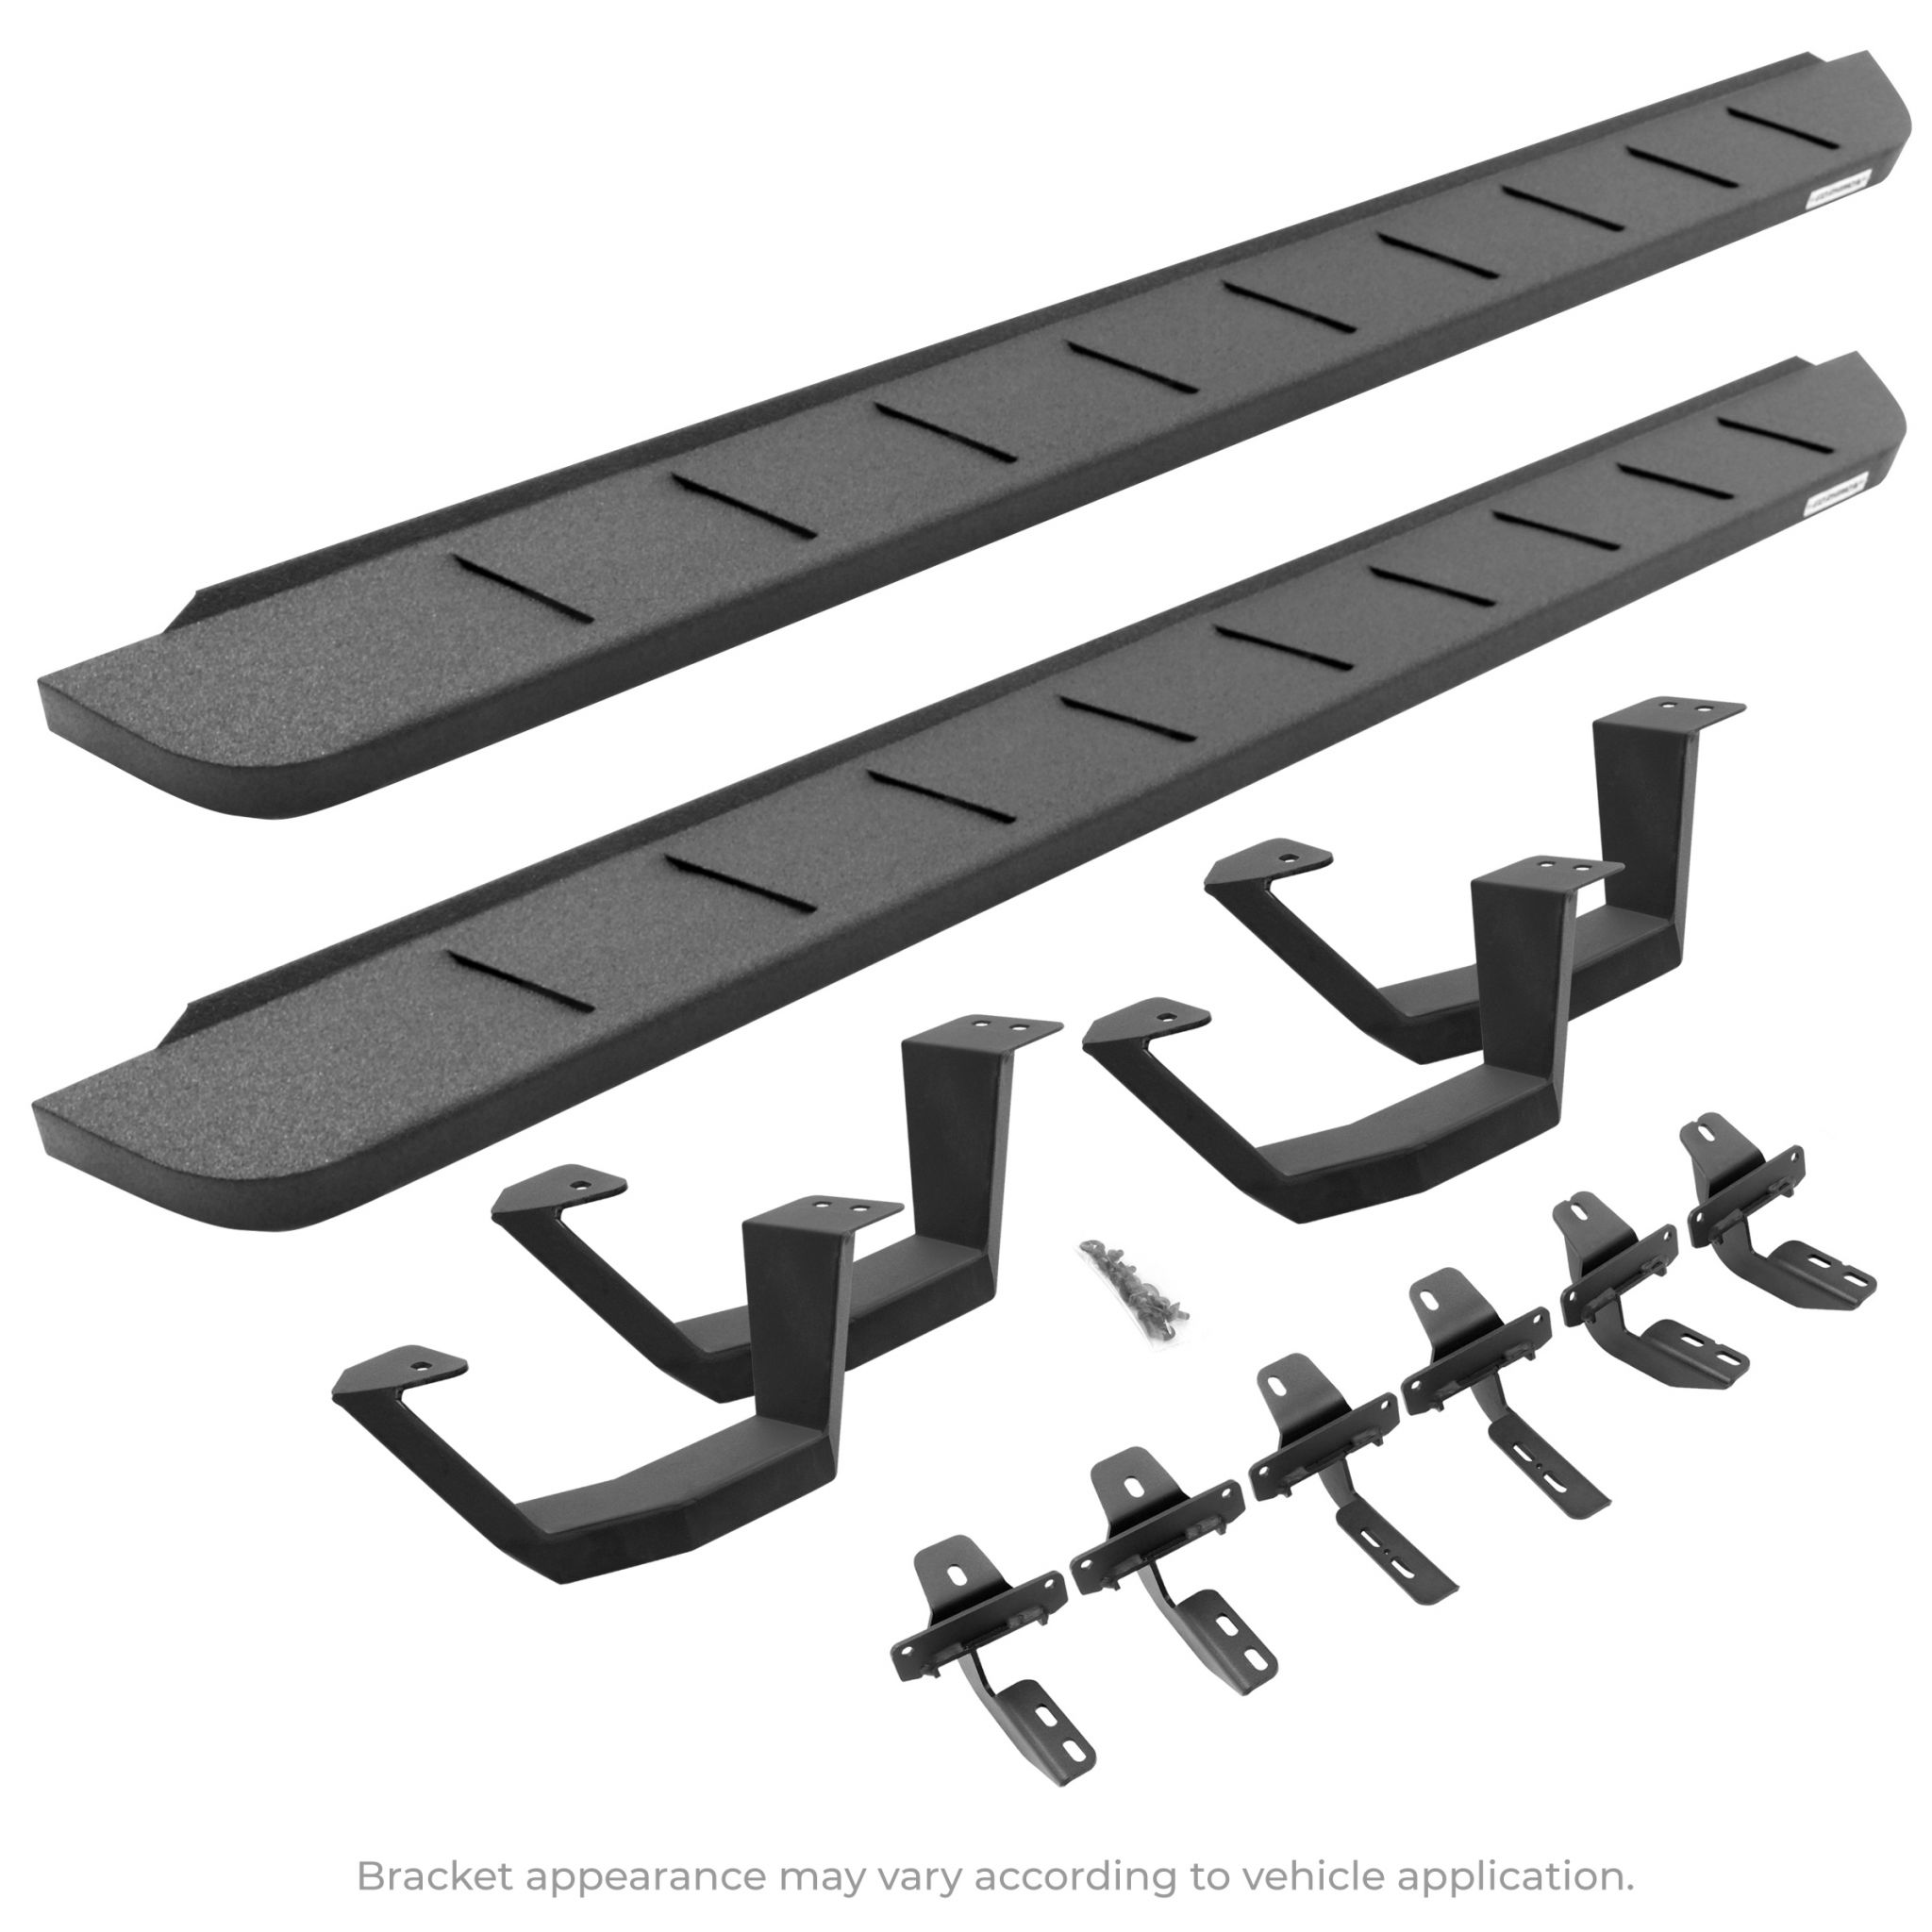 Go Rhino 6342358020T - RB10 Running Boards With Mounting Brackets & 2 Pairs of Drop Steps Kit - Protective Bedliner Coating